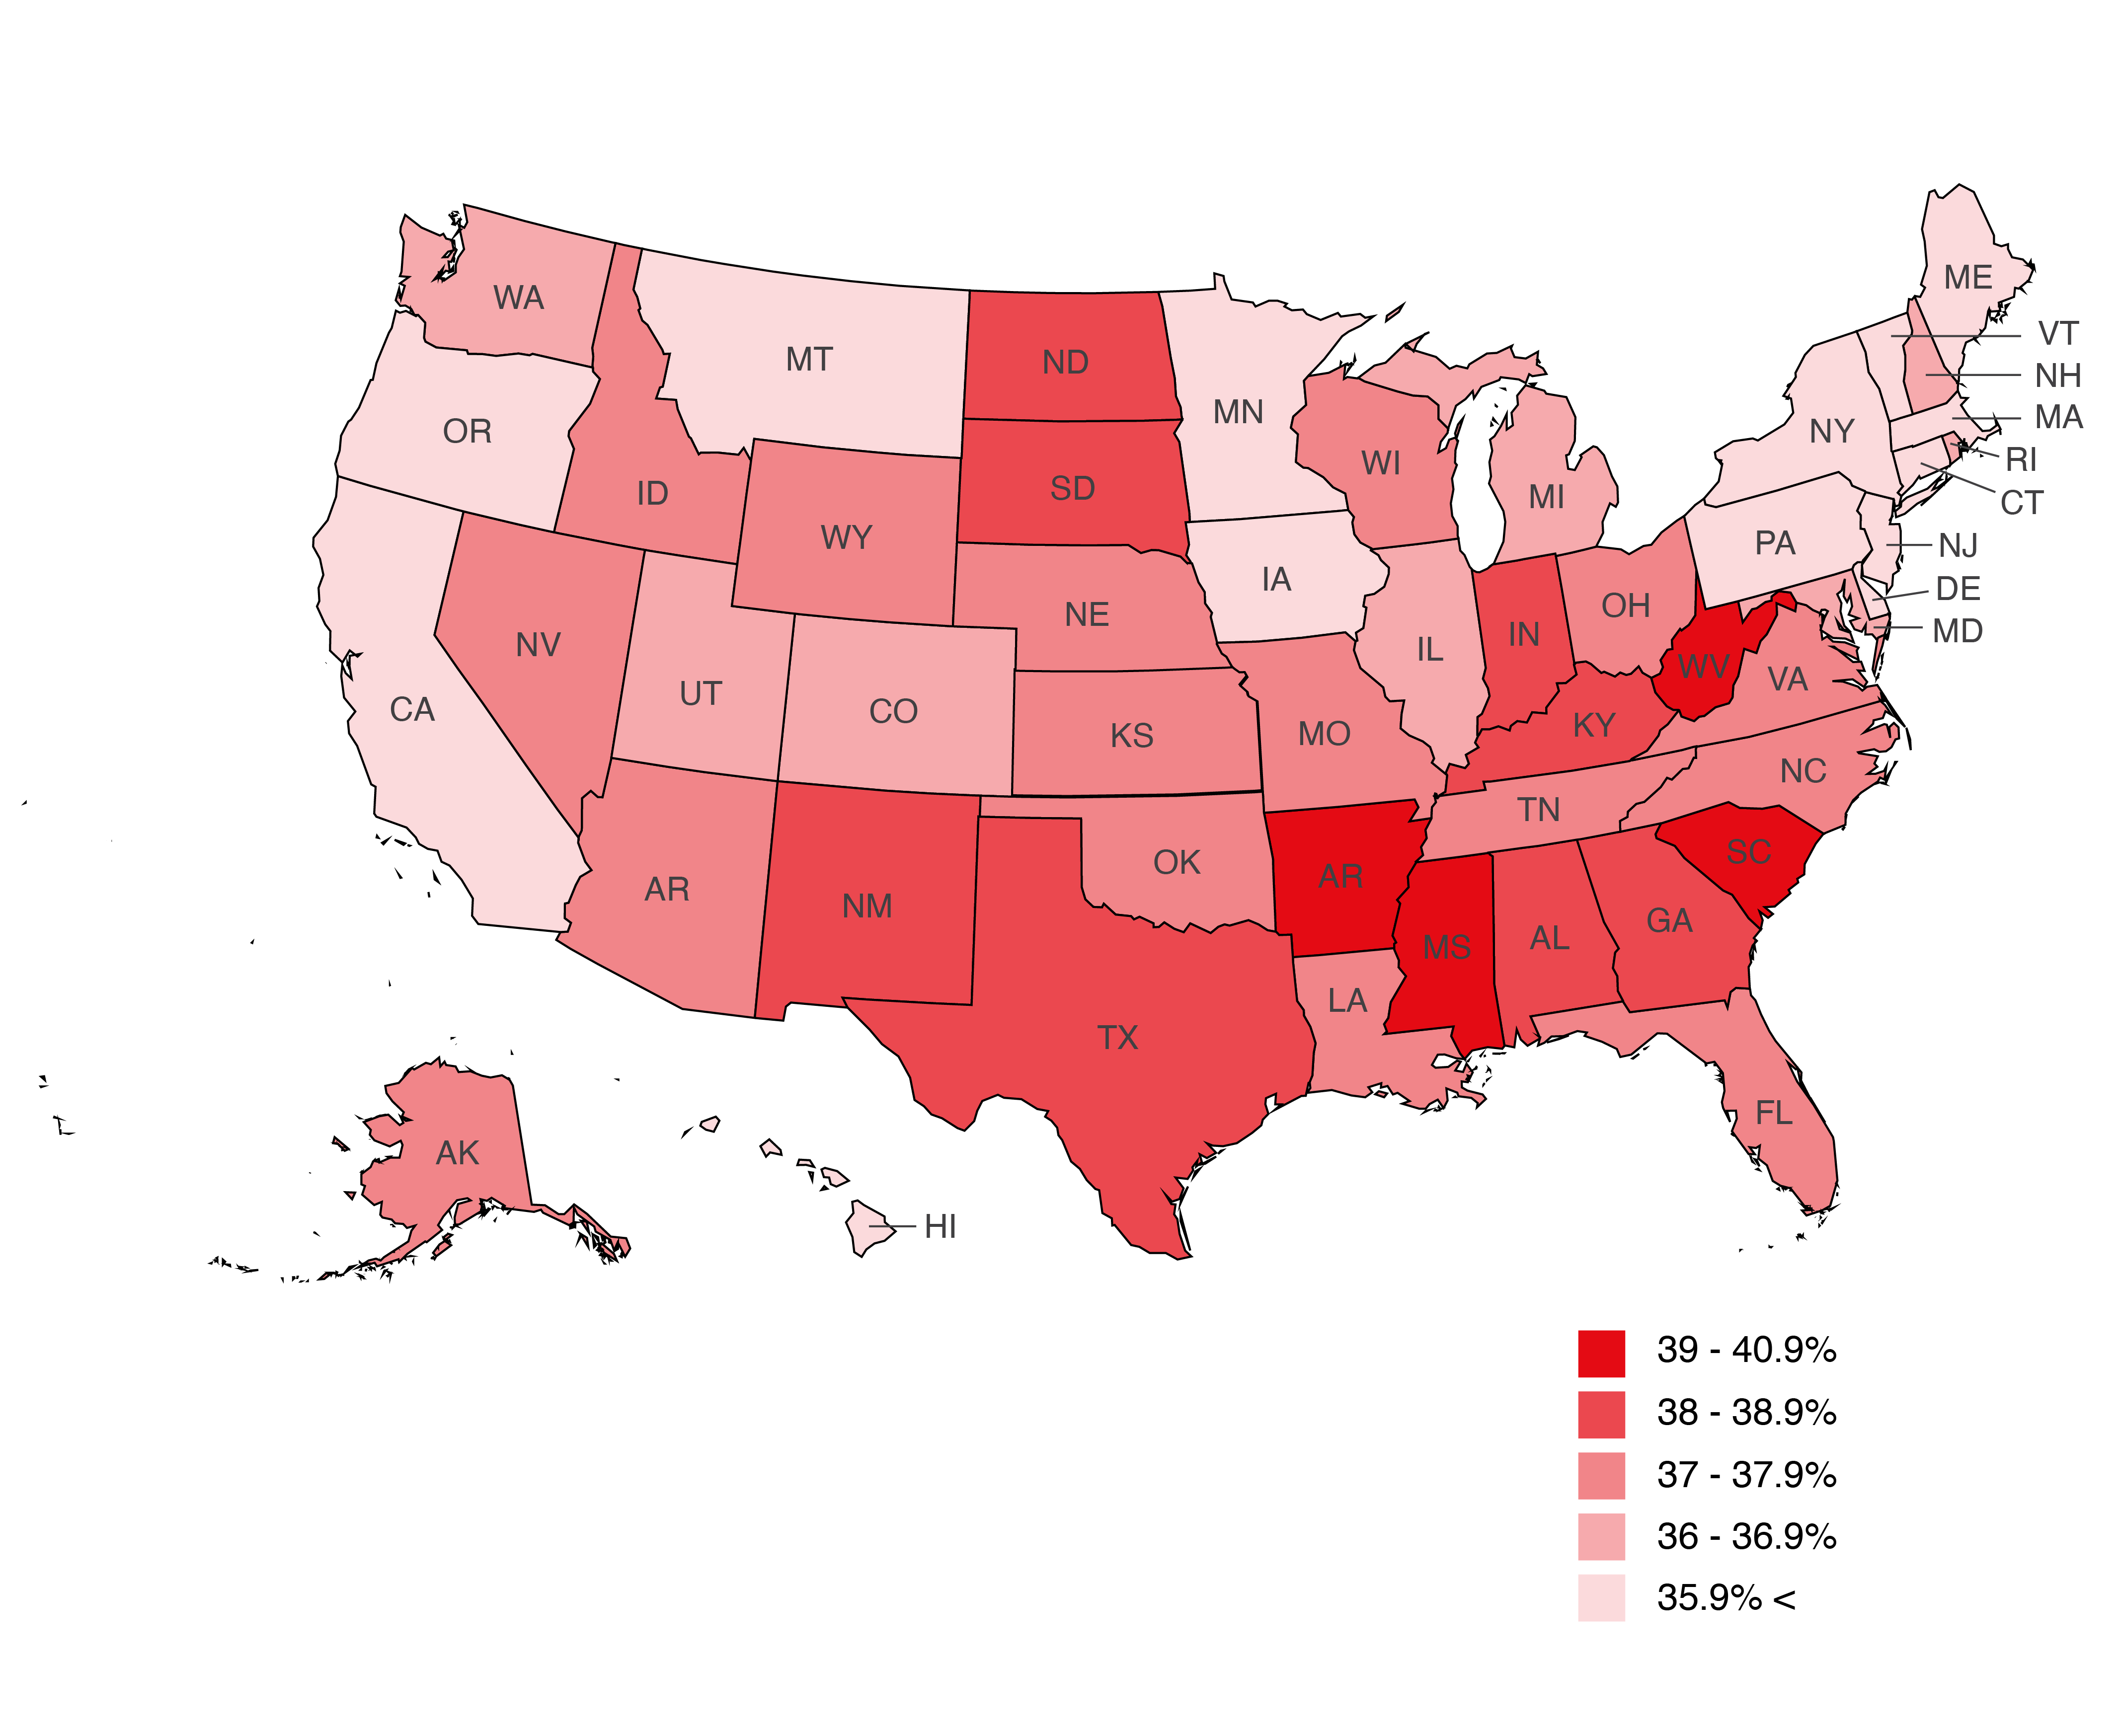 map of the united states showing higher rates of depression in the south east